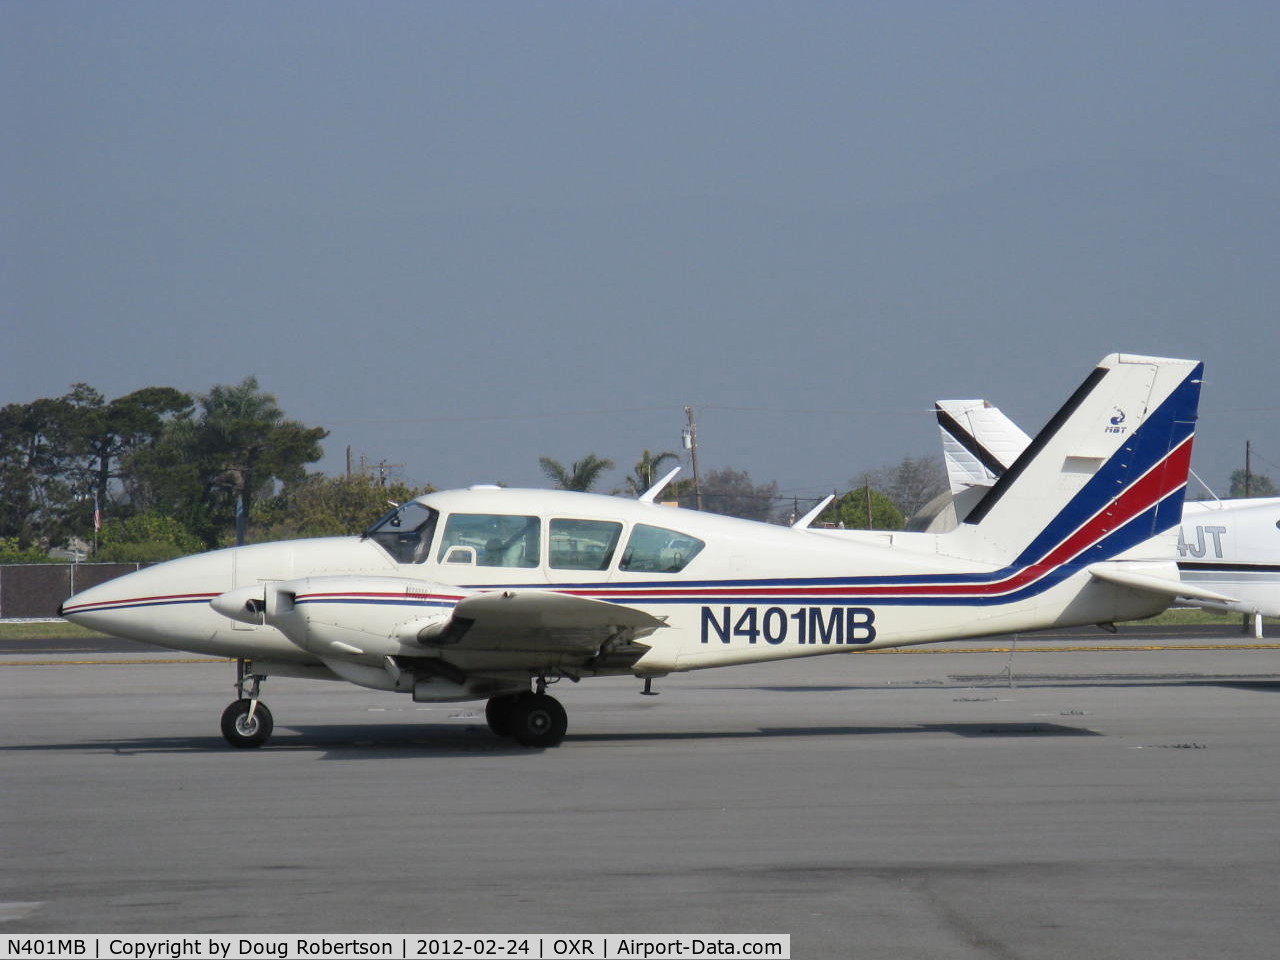 N401MB, 1977 Piper PA-23-250 C/N 27-7854013, 1977 Piper PA-23-250 AZTEC, two Lycoming TIO-540 Turbo conversions, six seats